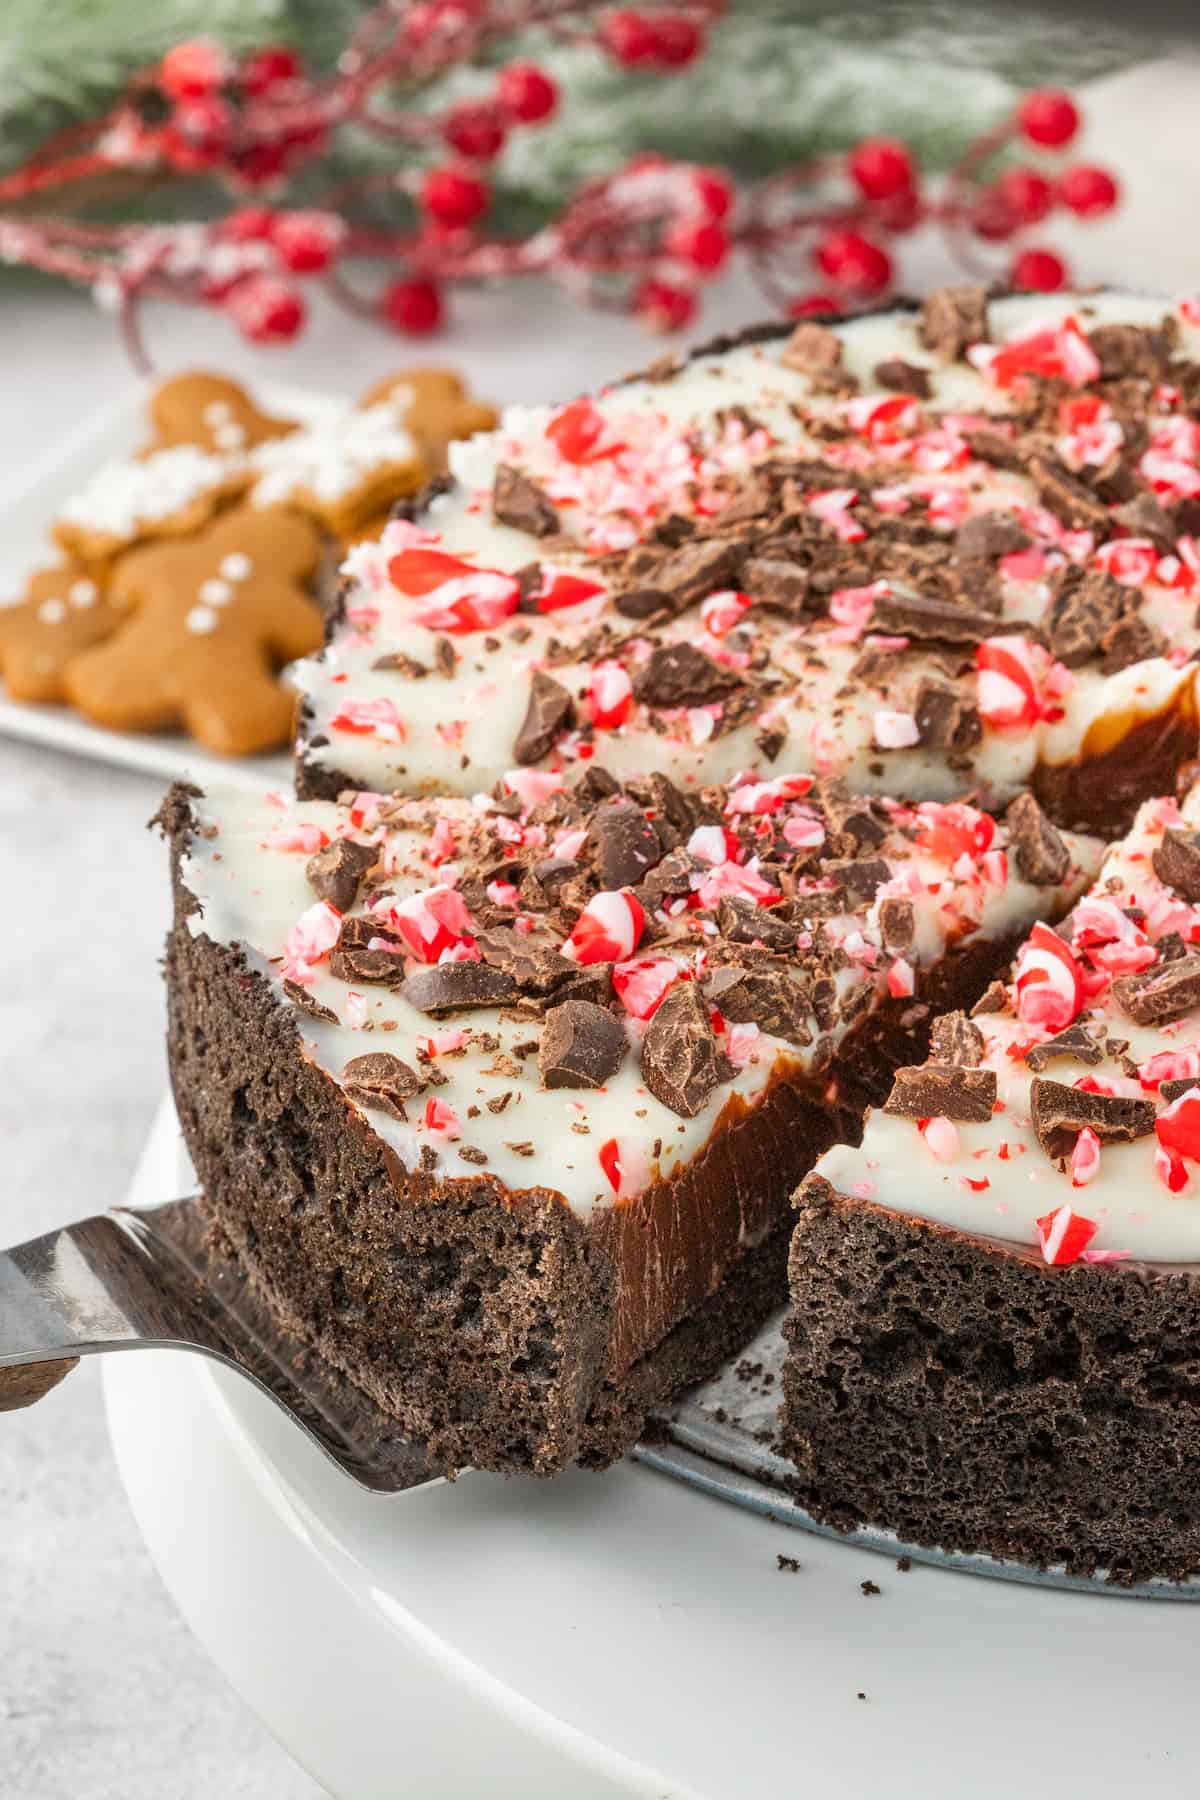 A chocolate peppermint cheesecake with a slice taken out, drizzled with rich chocolate ganache and topped with a festive candy cane.